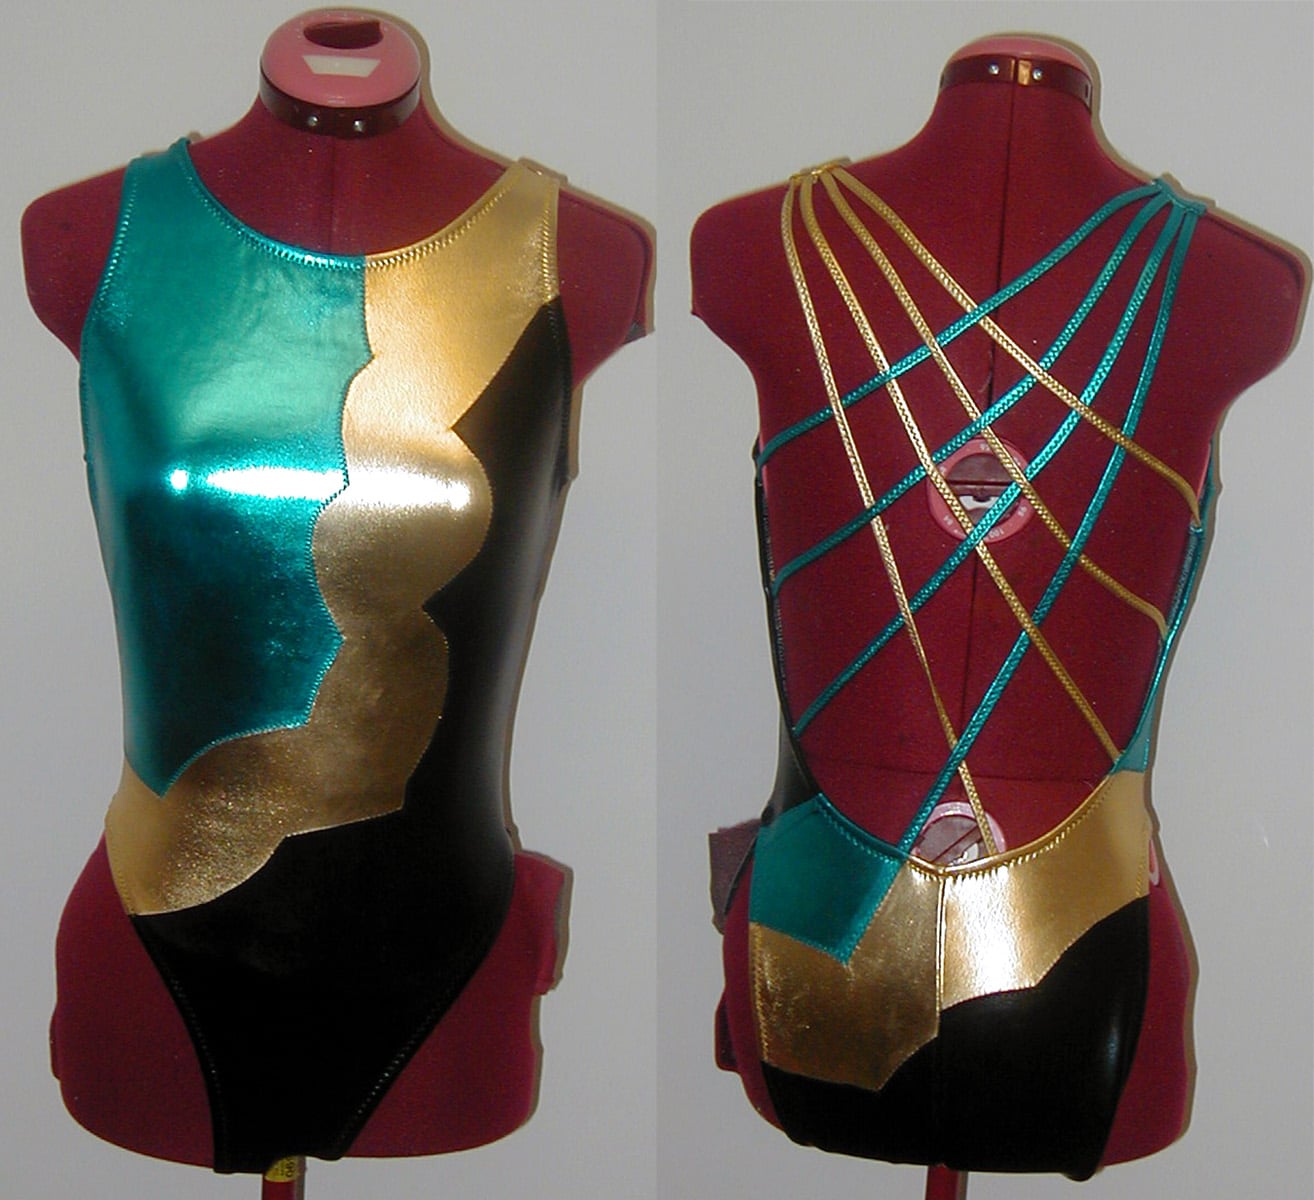 Front and back views of a shiny blue, gold, and black synchro swimsuit.